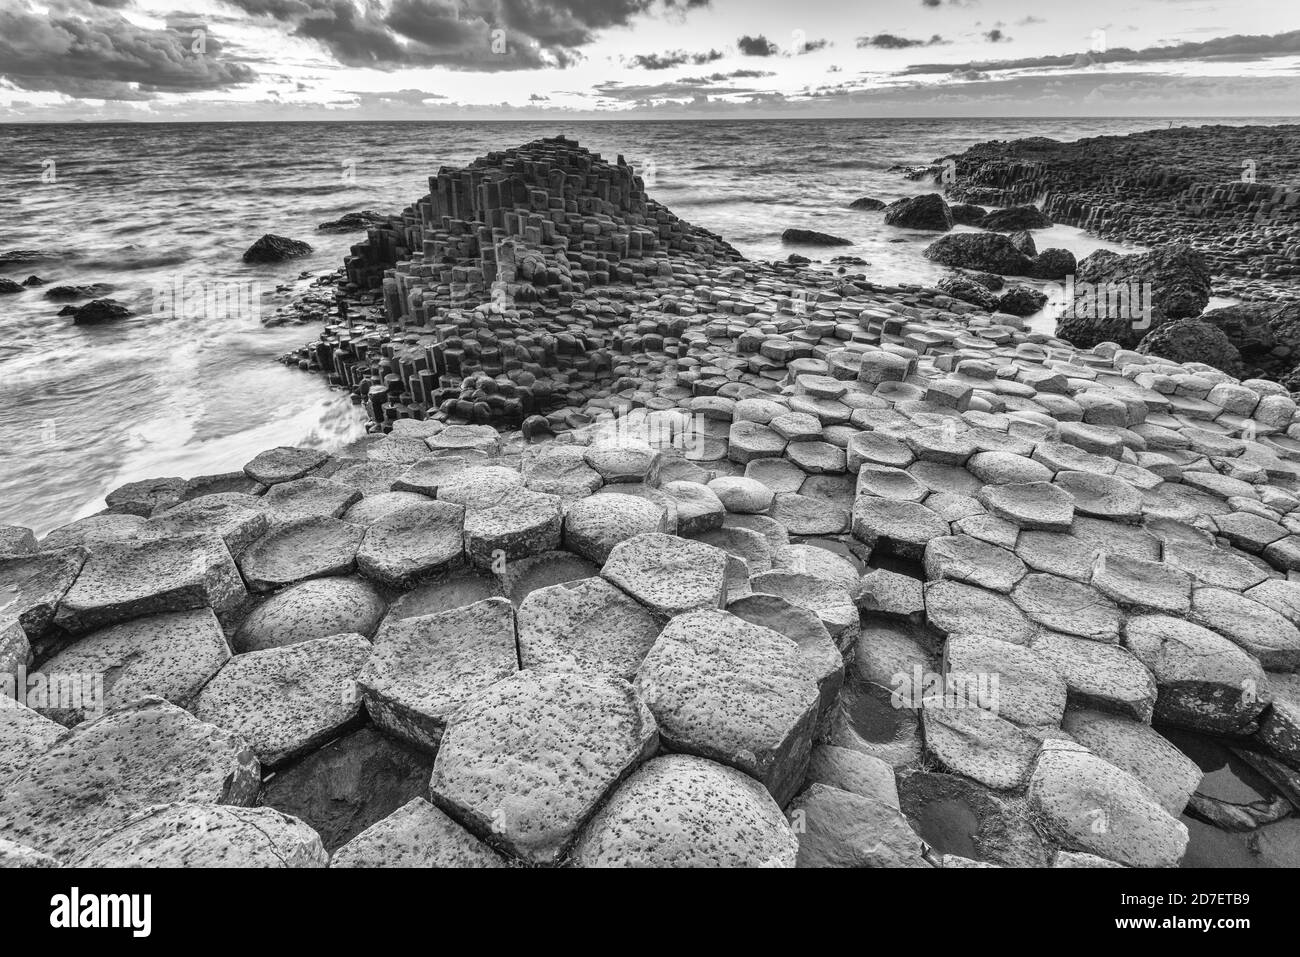 Sunset at the Giant's Causeway, a UNESCO world heritage site of some 40,000 hexagonal columns on the Antrim coast of Northern Ireland. Stock Photo